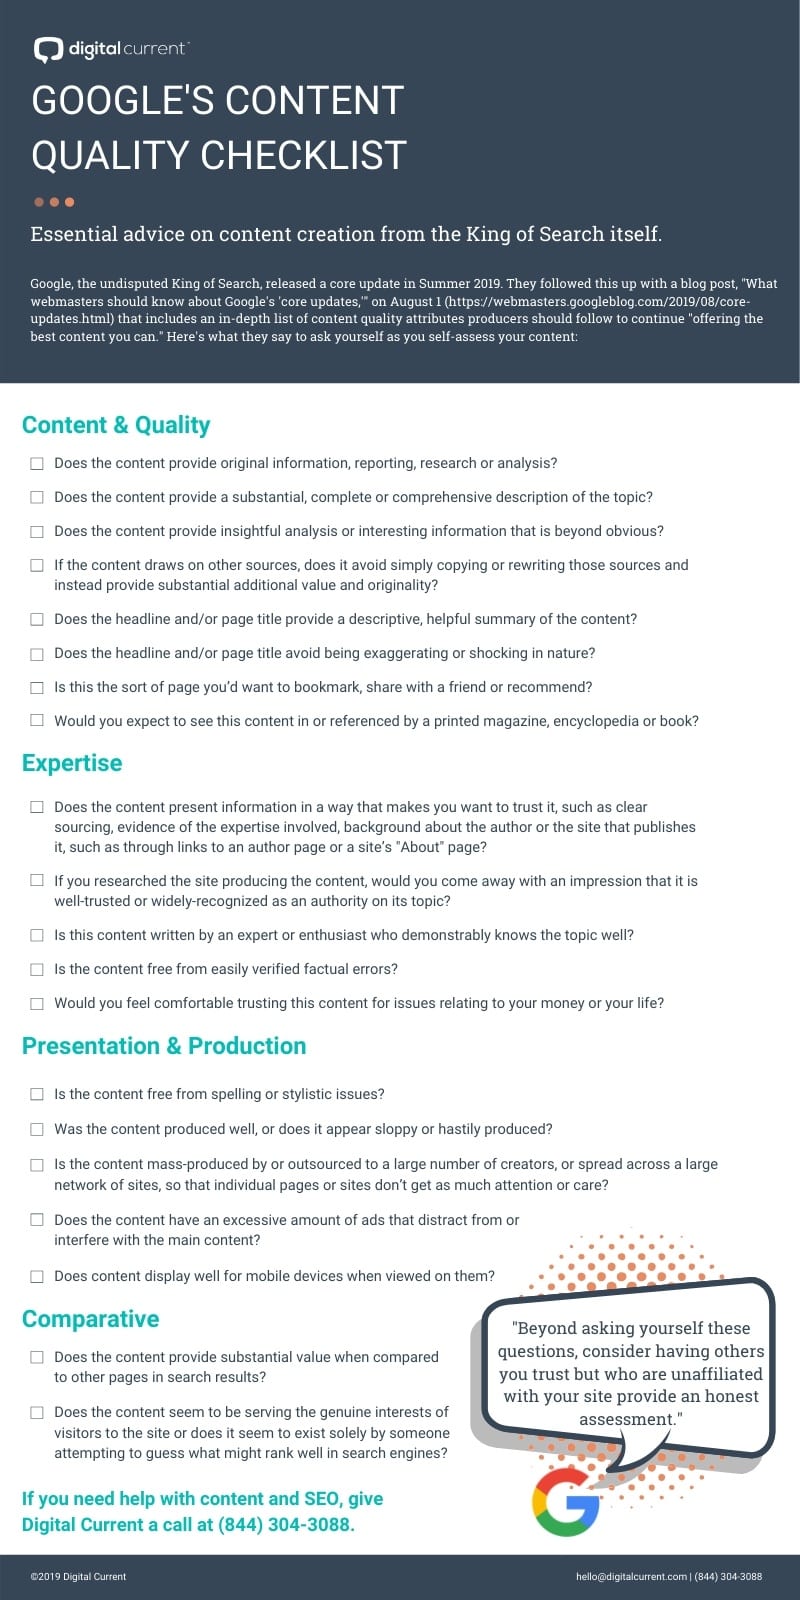 A checklist for creating quality content